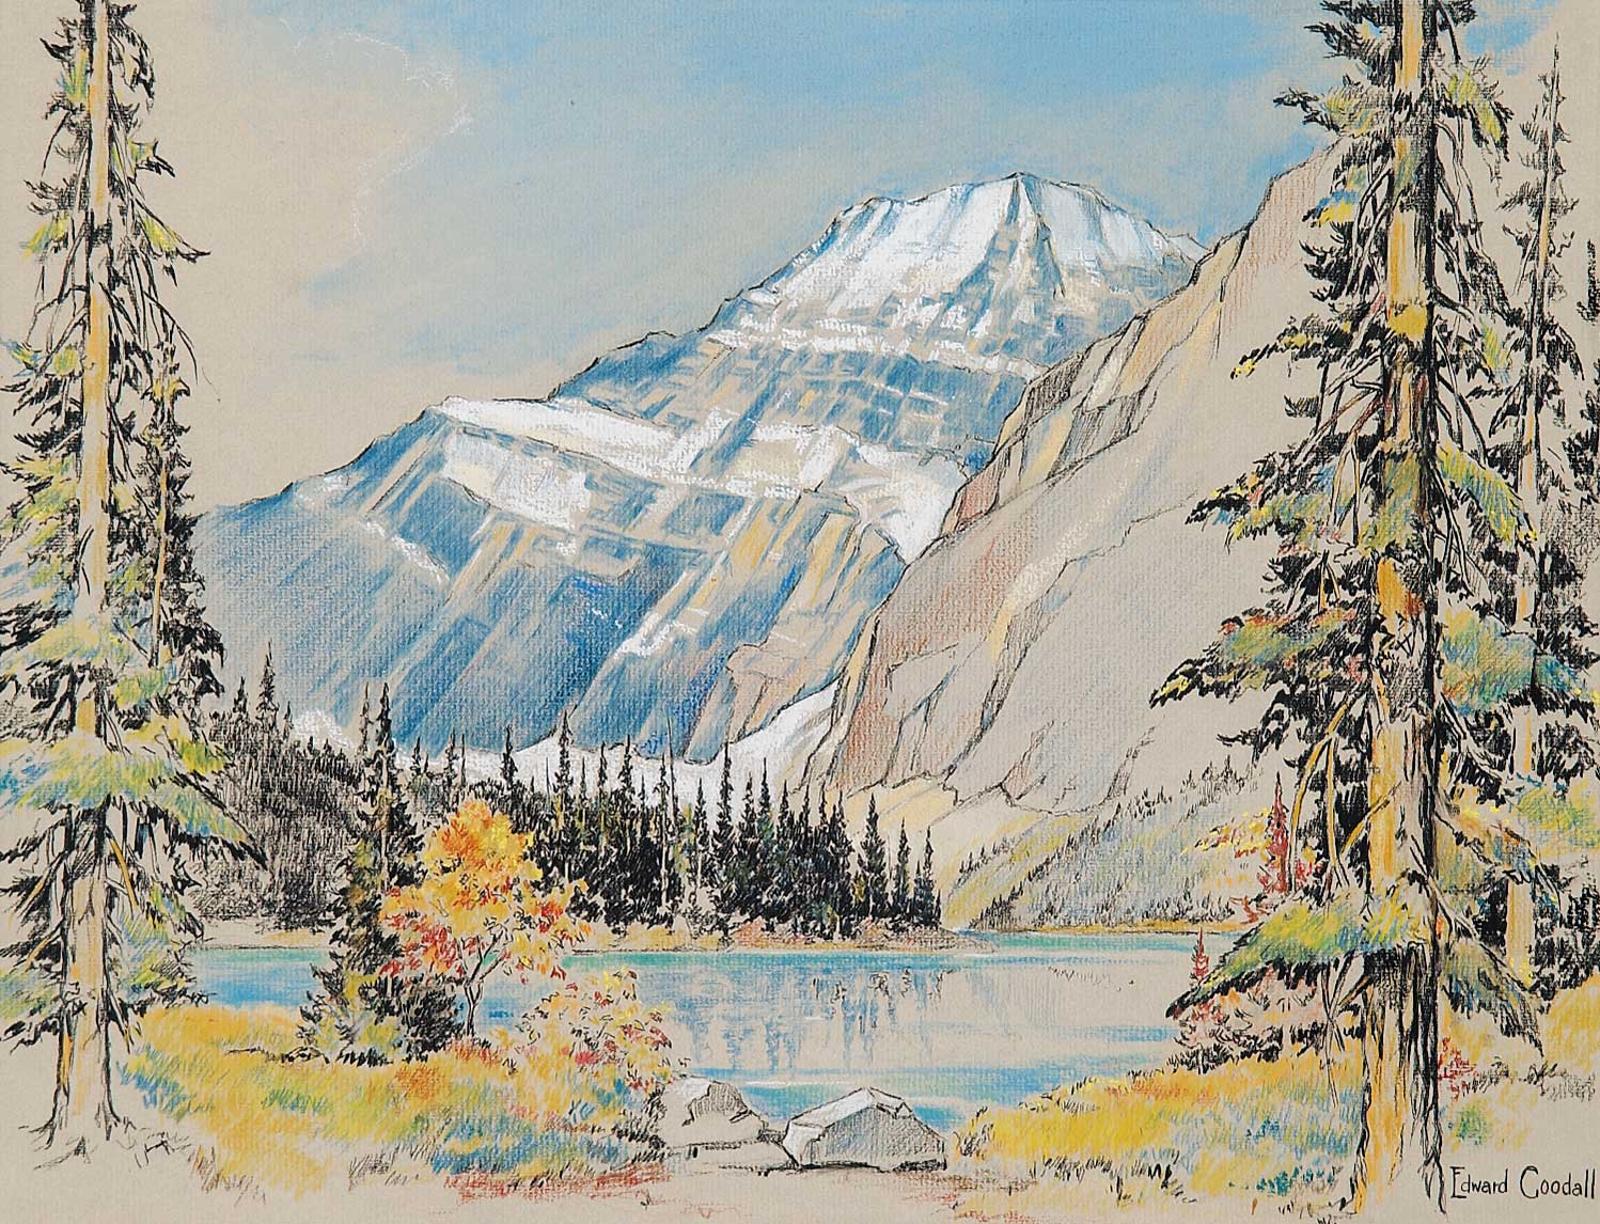 Edward Goodall (1909-1982) - Untitled - A View of the Mountains in Springtime